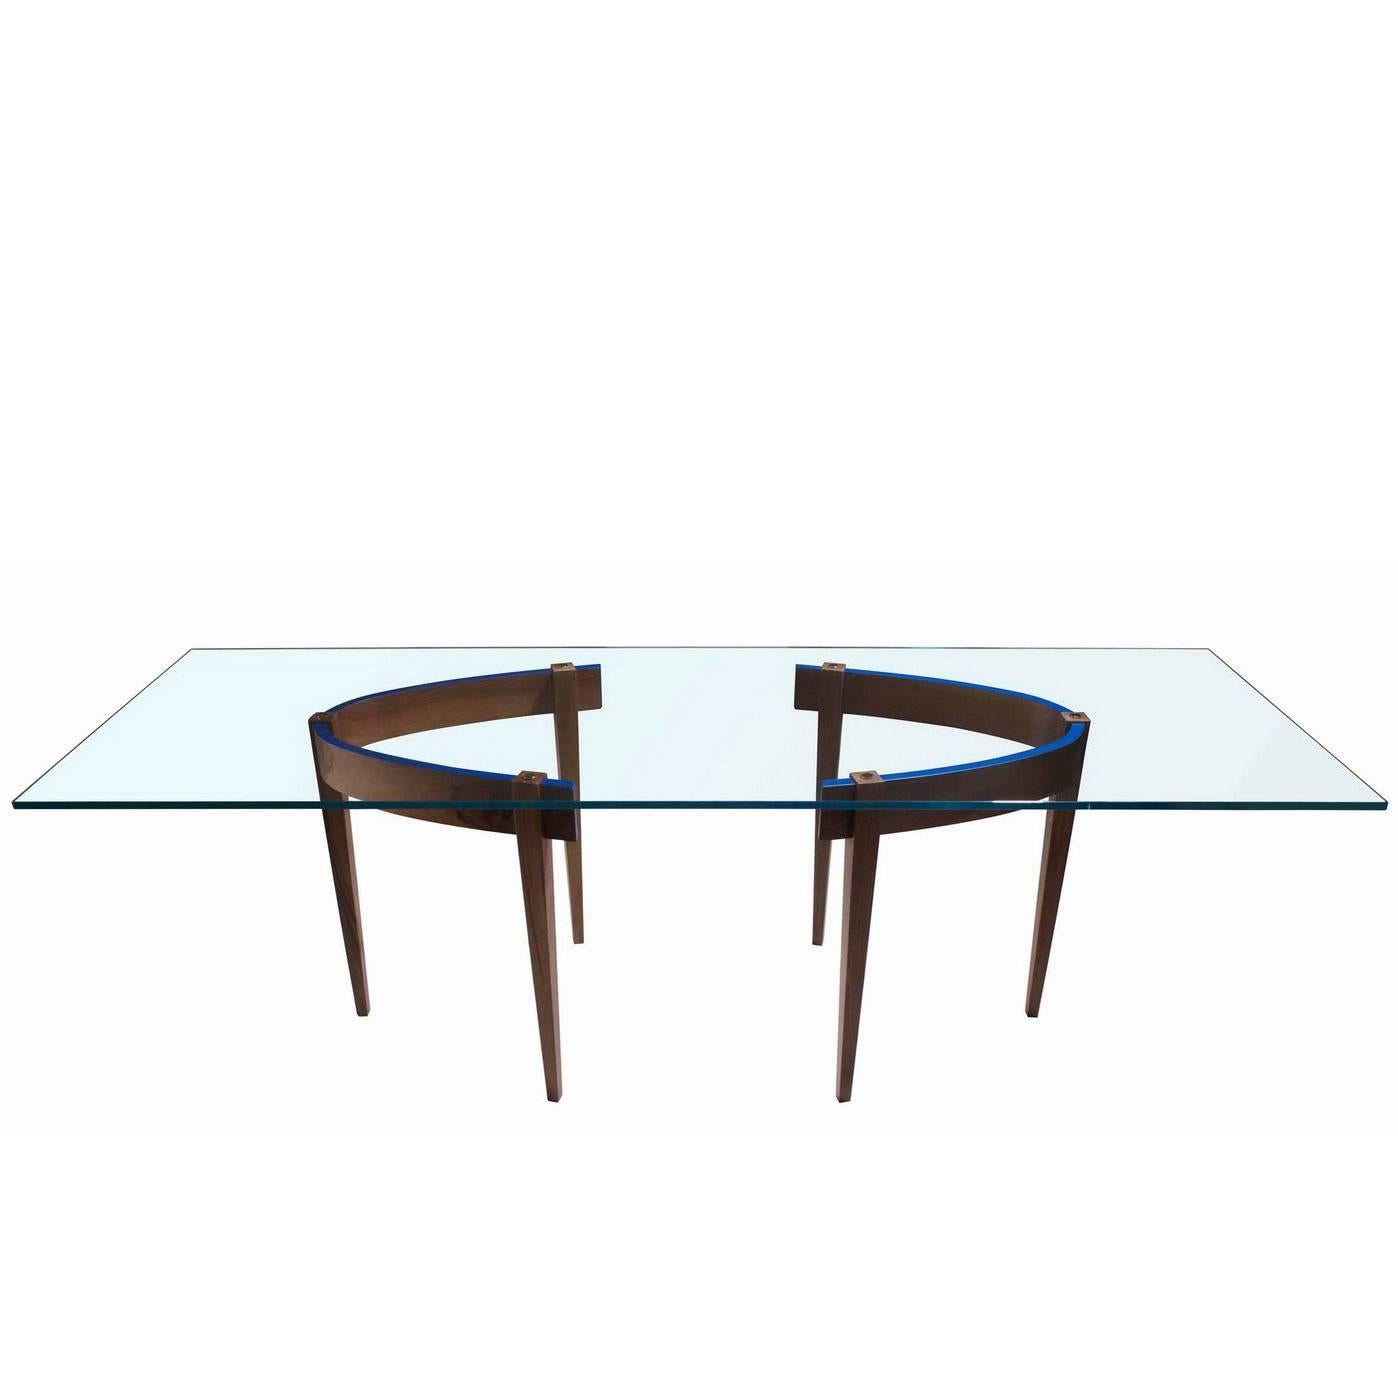 "The Round Table A3" Glass Top Rectangular Table by R. Gilad, Adele-C